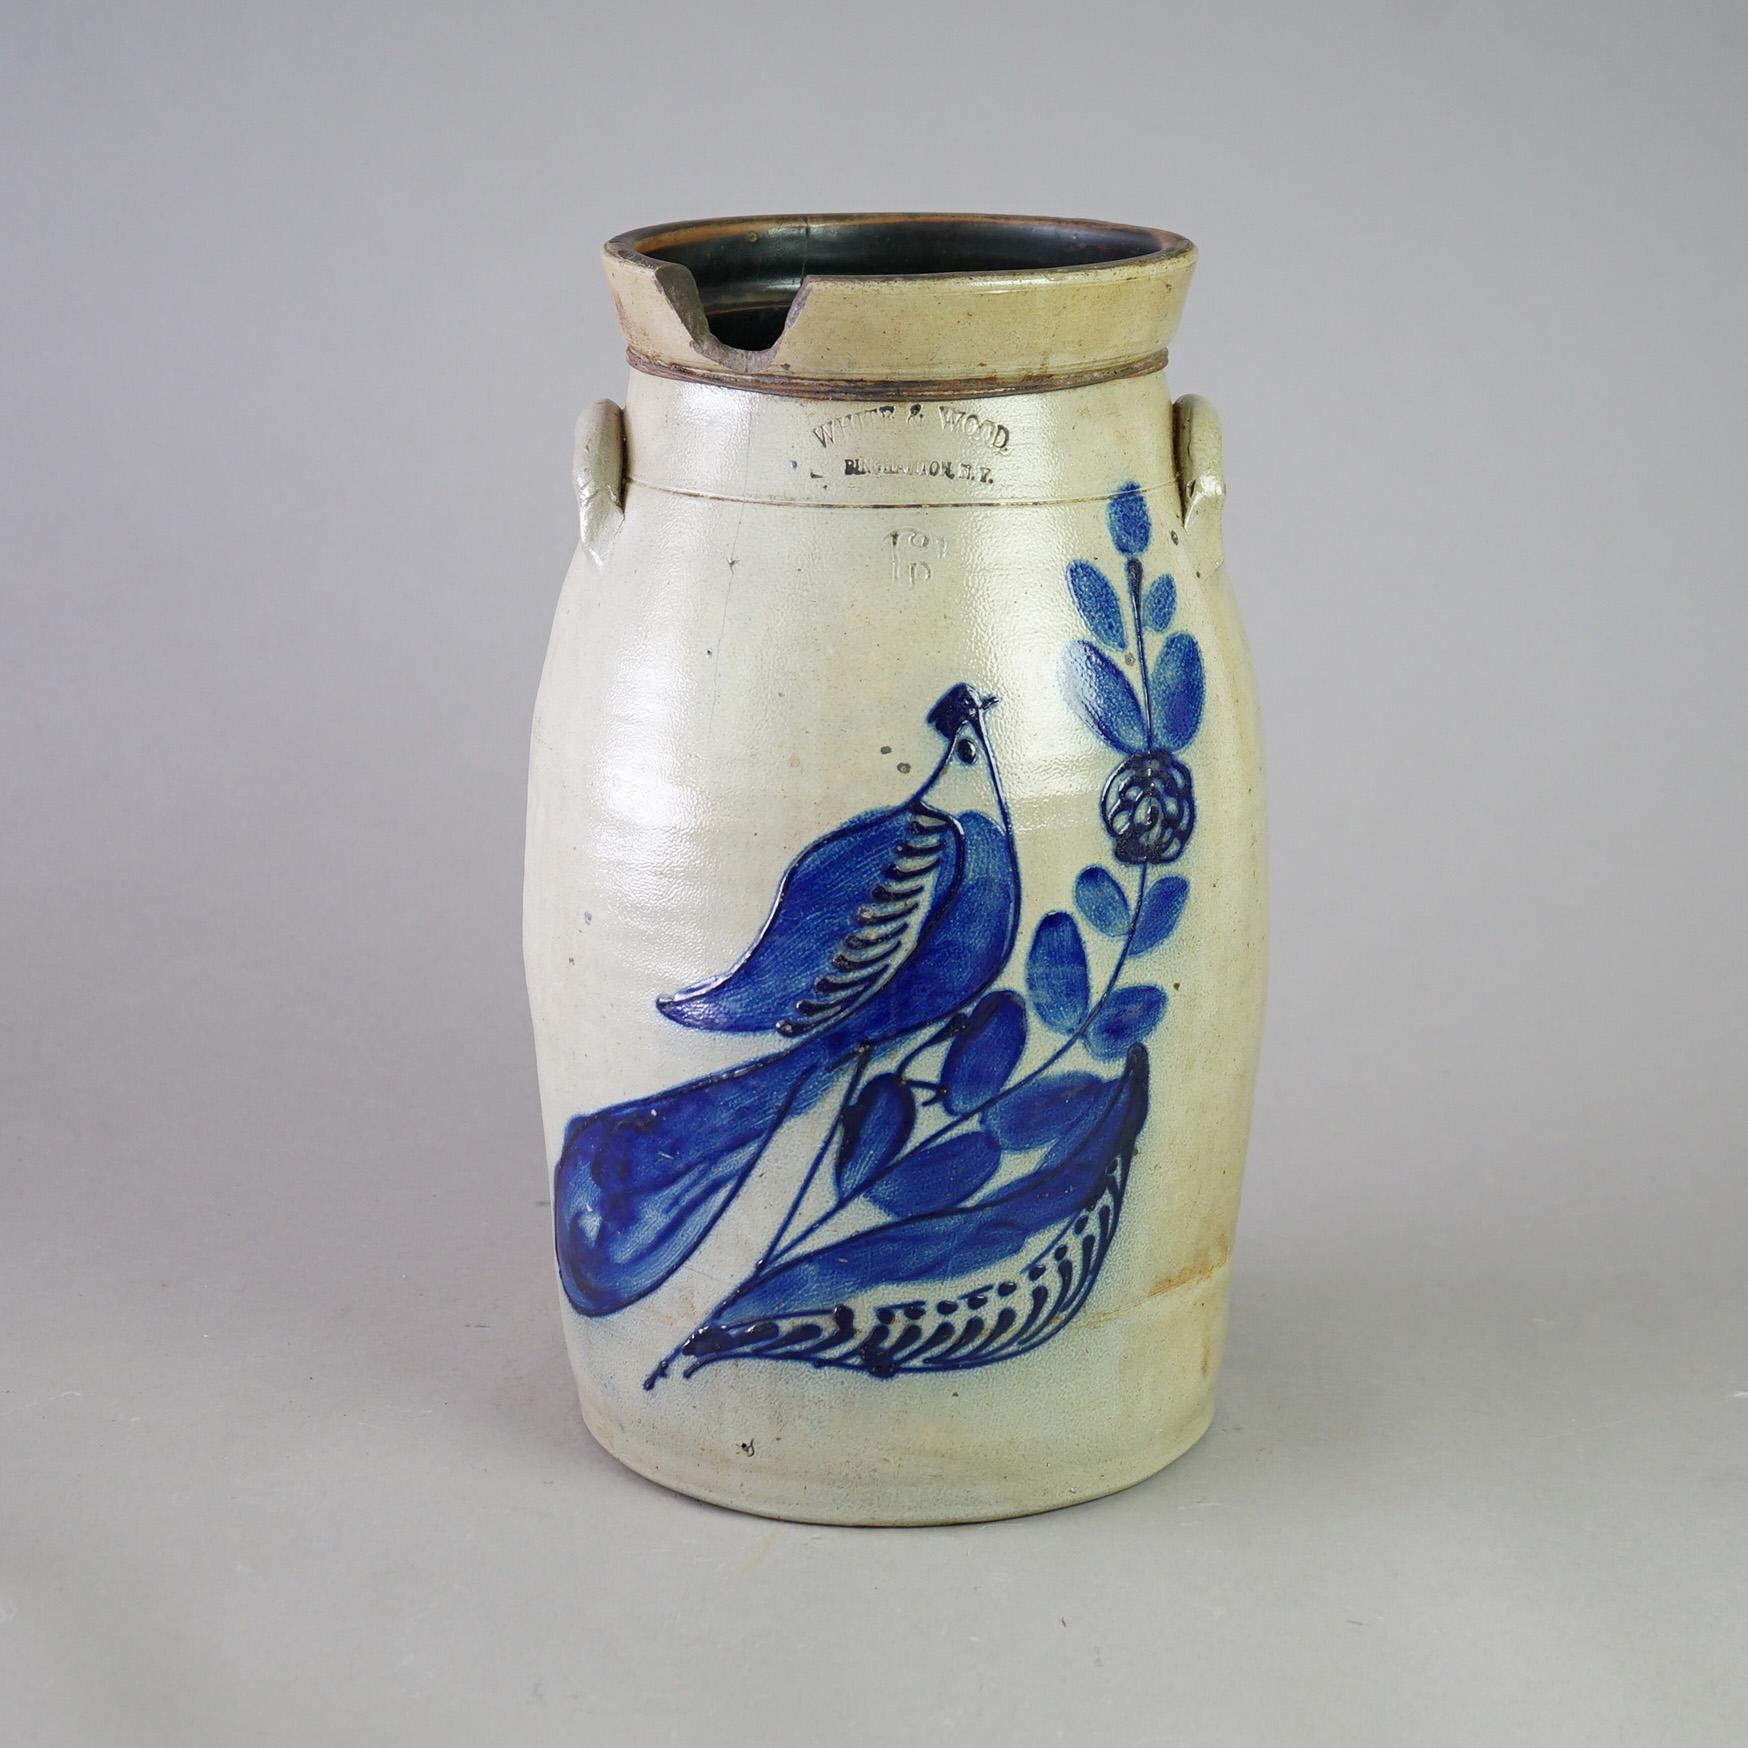 An antique Binghamton White and Wood churn crock offers stoneware construction with double handles, blue decorated with a paddle bird, and maker stamped, c1870

Measures - 18.25